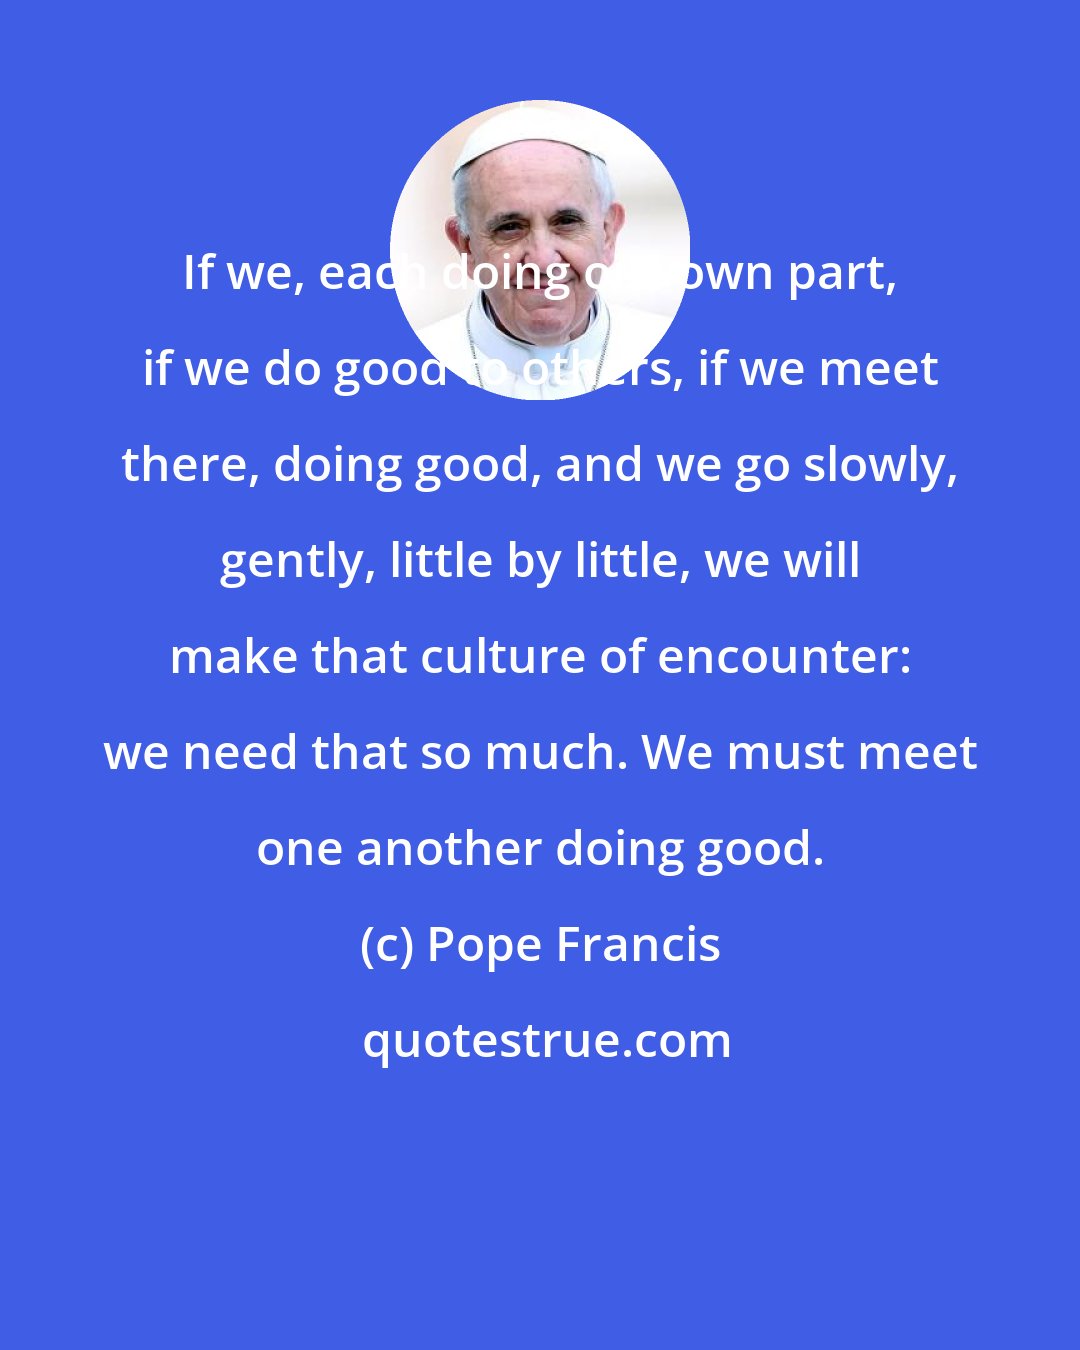 Pope Francis: If we, each doing our own part, if we do good to others, if we meet there, doing good, and we go slowly, gently, little by little, we will make that culture of encounter: we need that so much. We must meet one another doing good.